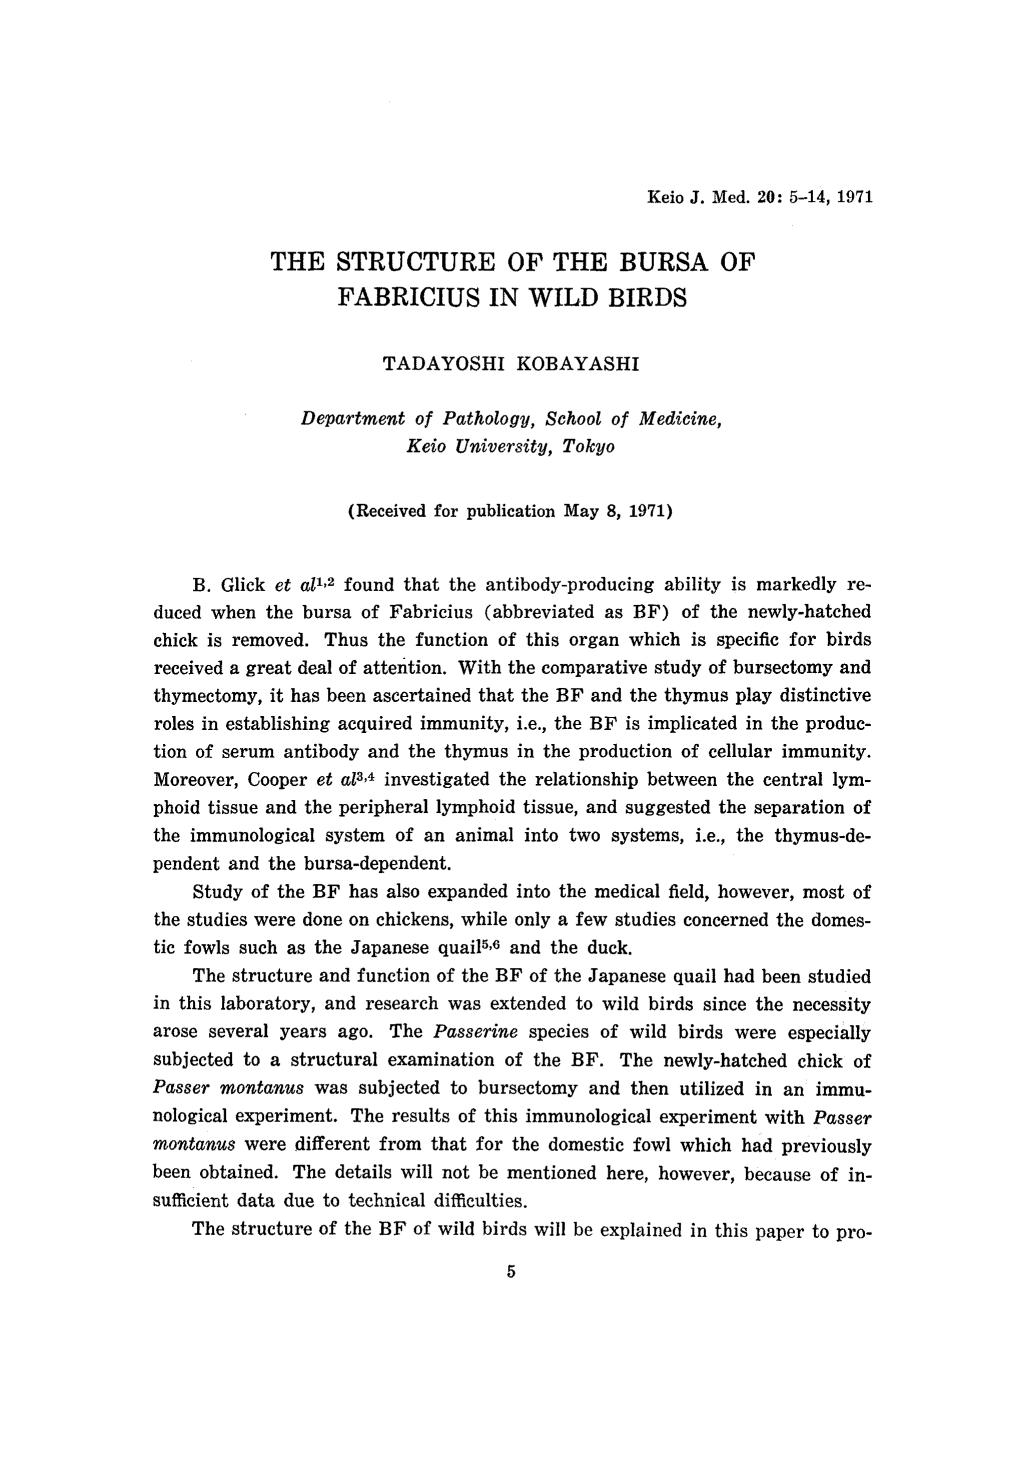 THE STRUCTURE of the BURSA of FABRICIUS in WILD BIRDS The